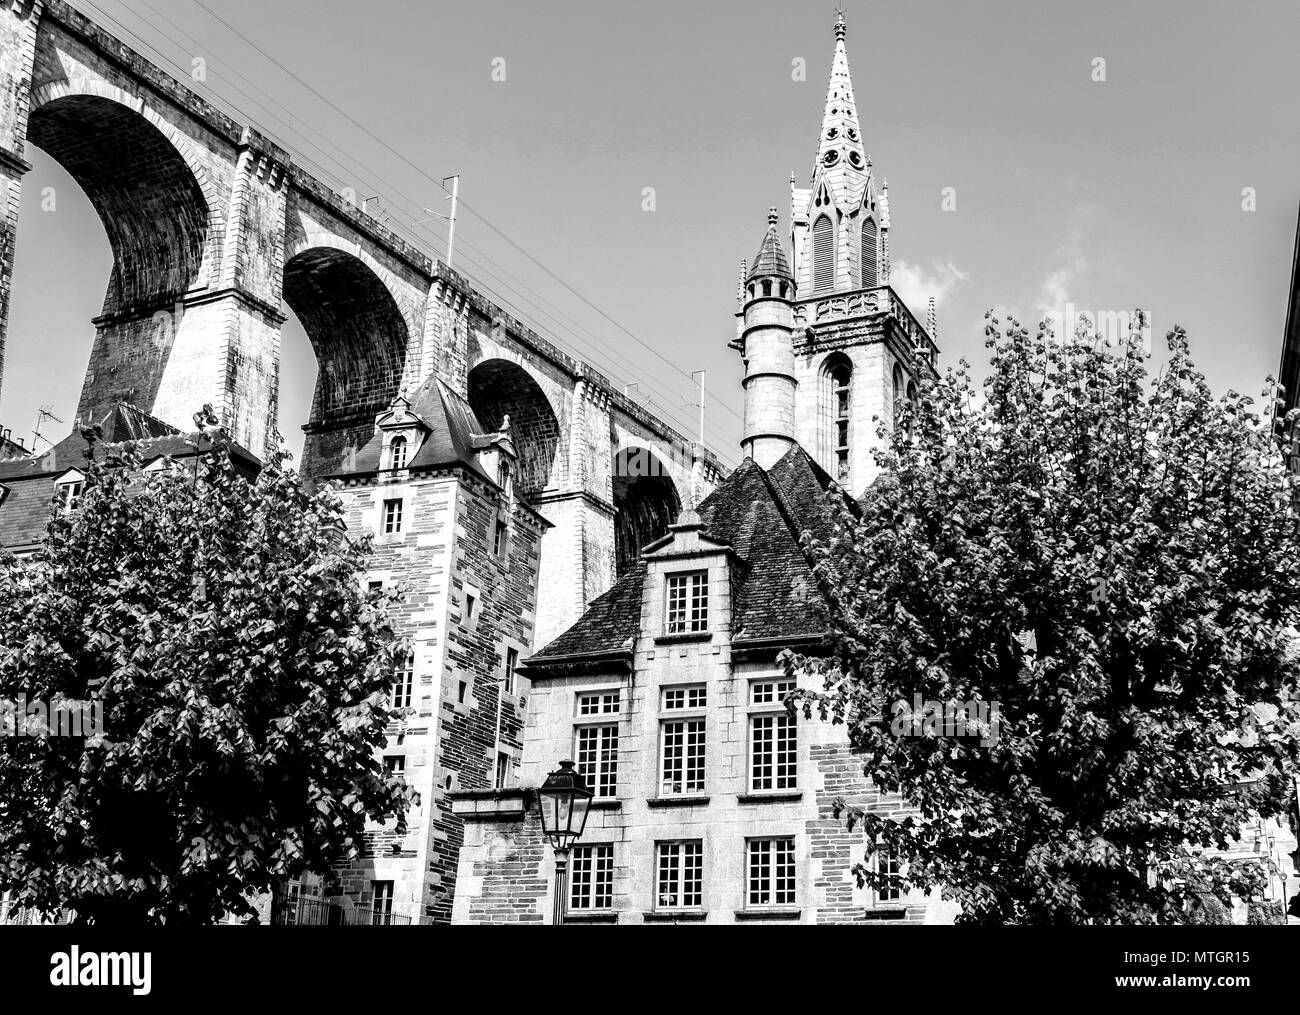 The 1800s viaduct in Morlaix, Brittany, France looms over the town below. Black & white. Stock Photo